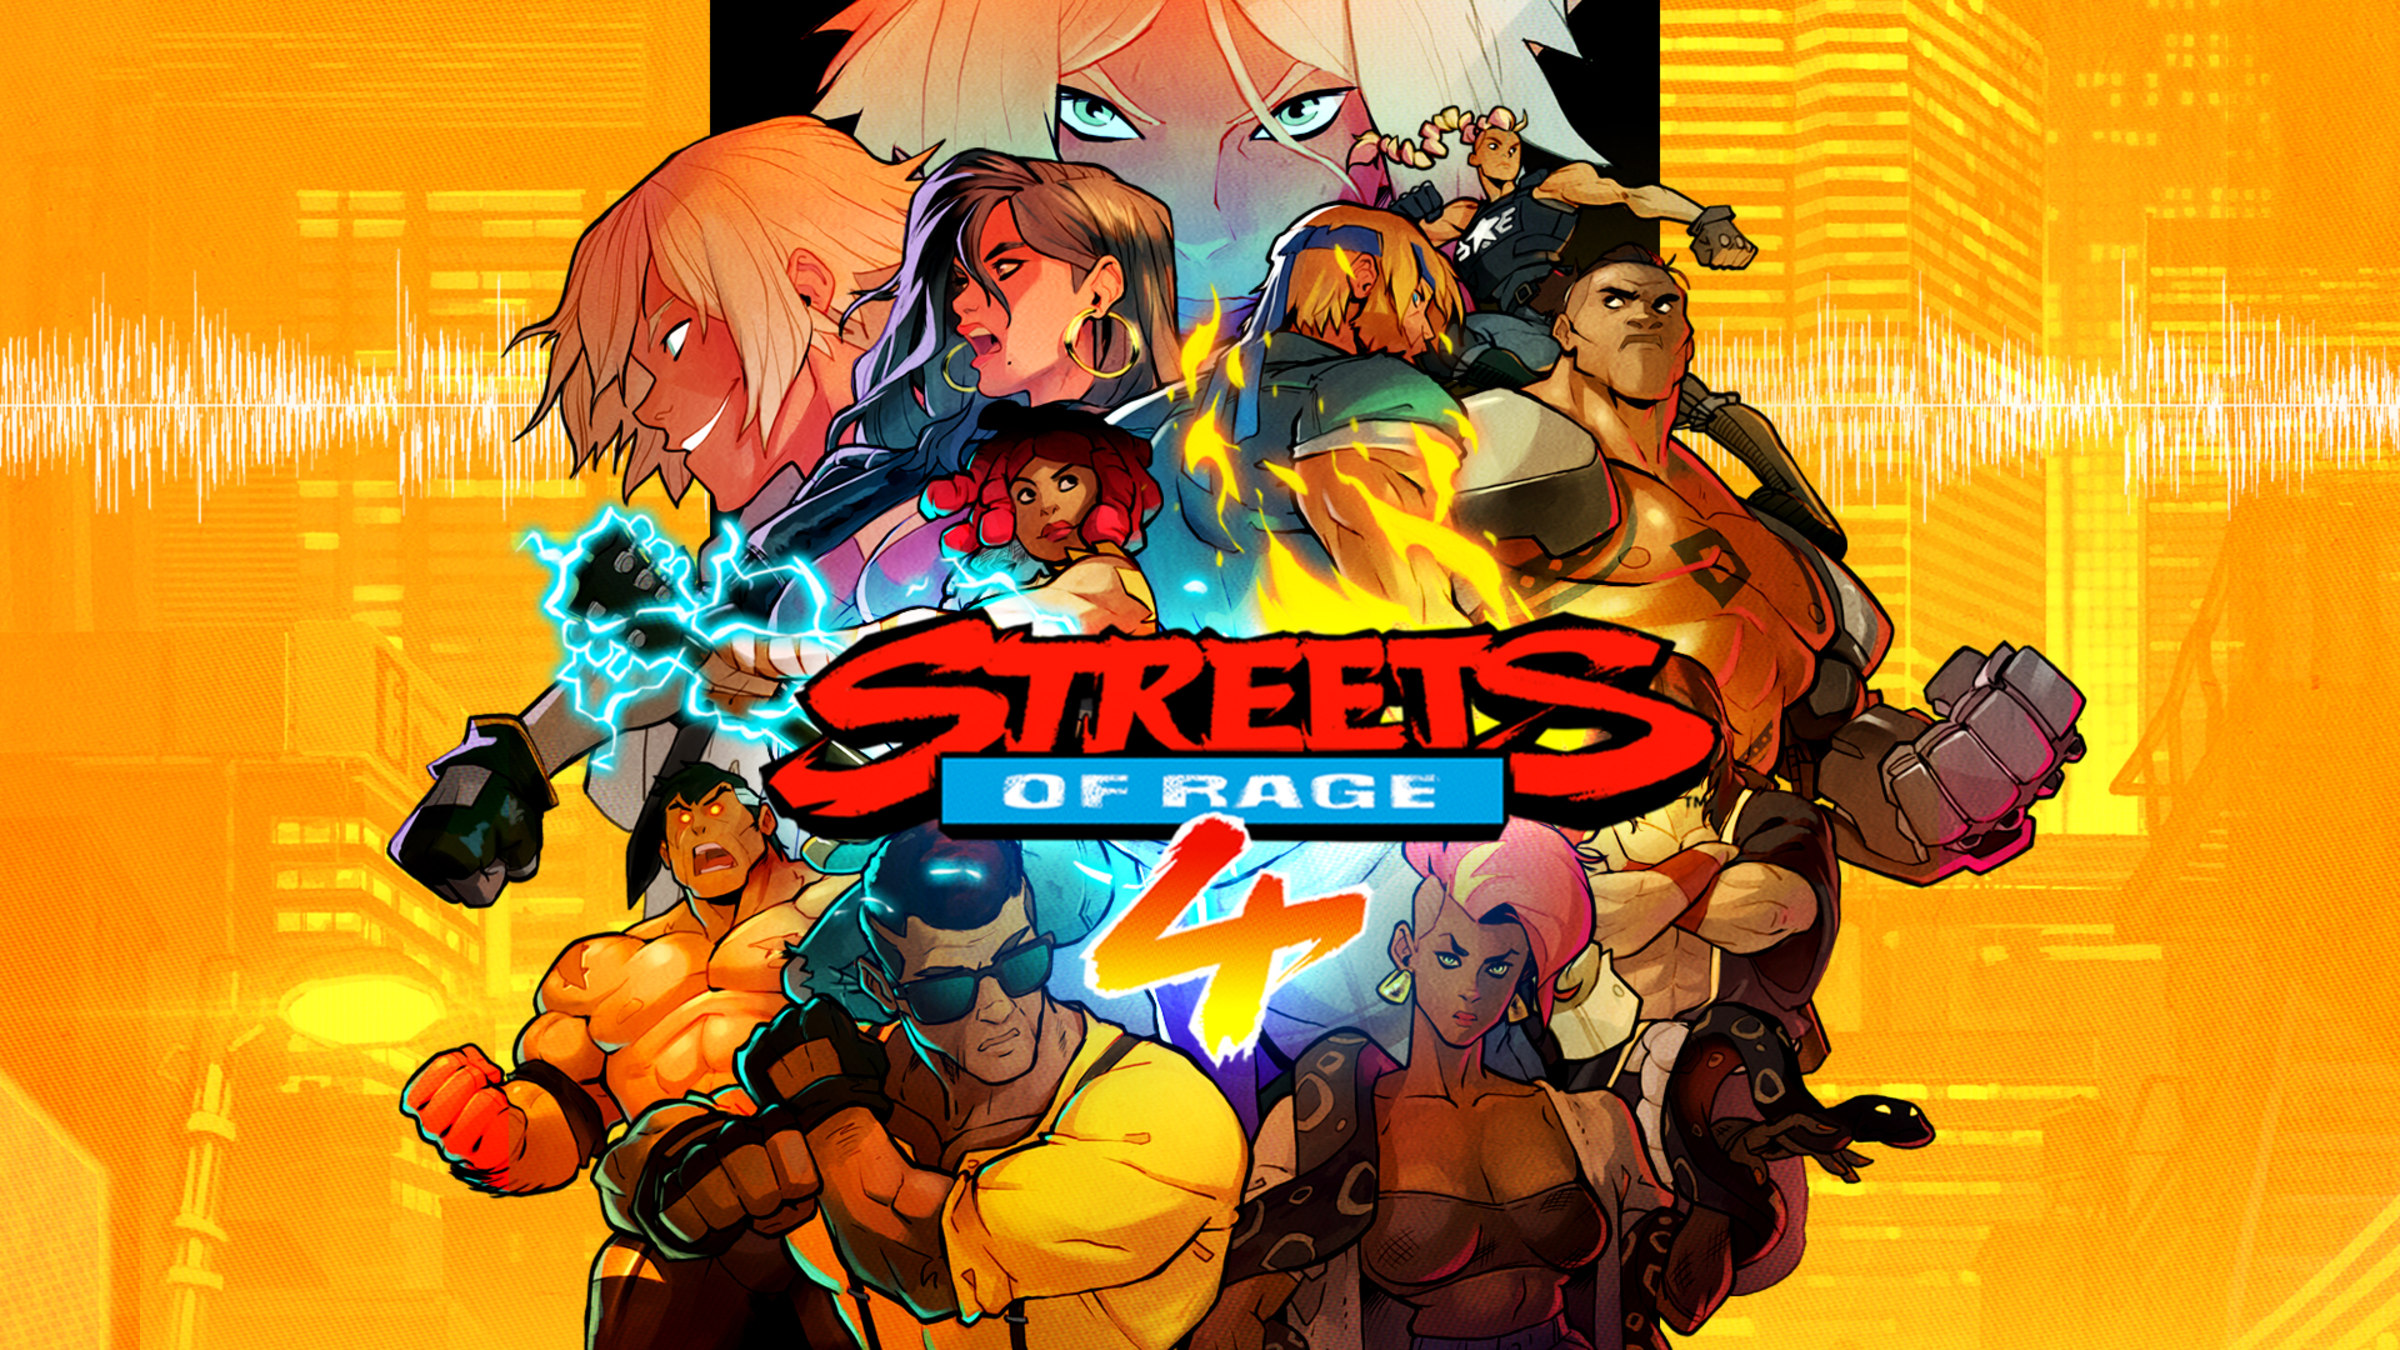 Streets of Rage 4 - Nintendo Switch, Beautiful graphics fully hand